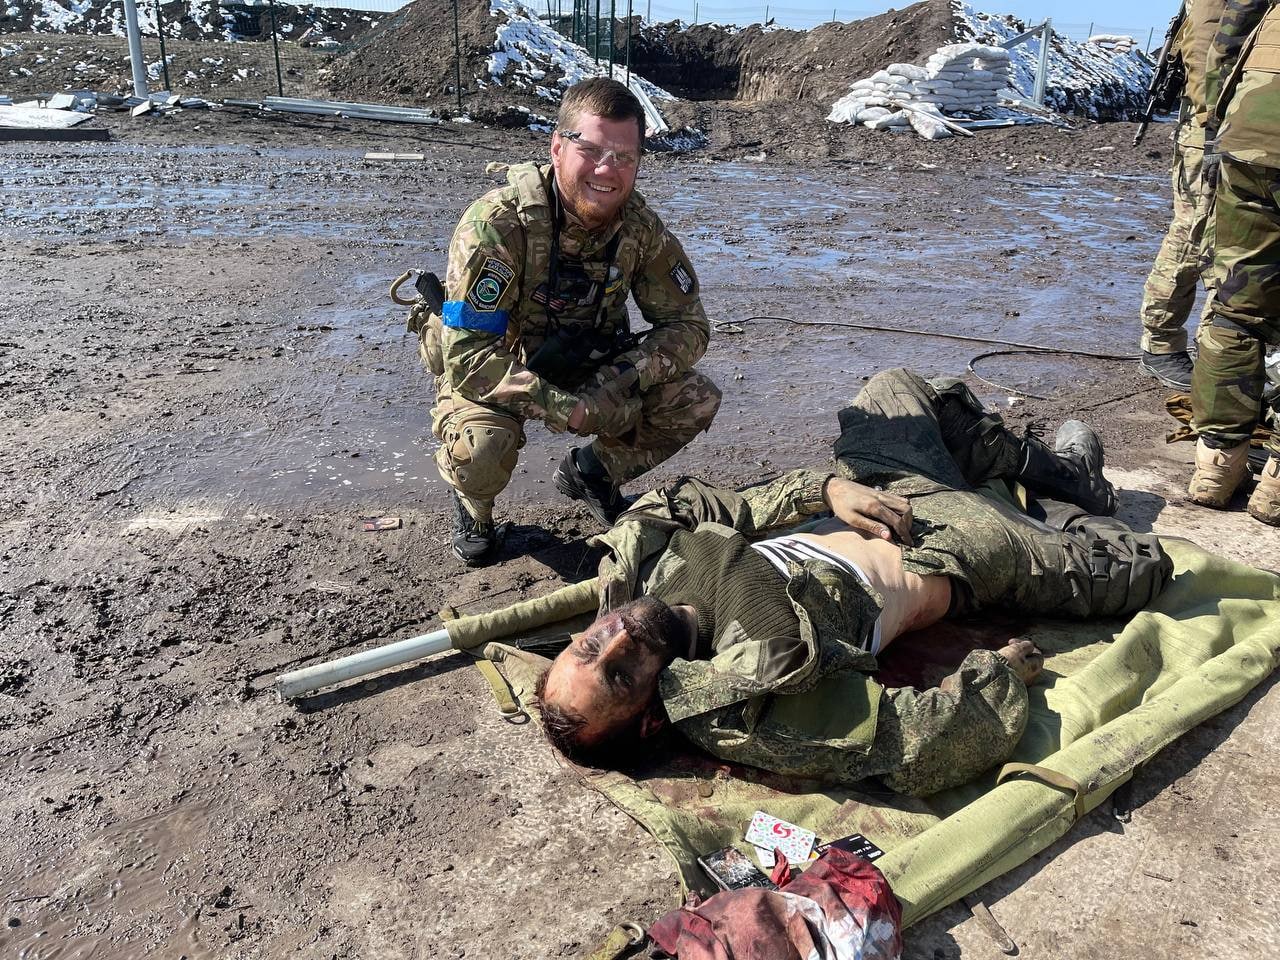 Ukrainian military poses against the backdrop of the corpse of a Russian soldier